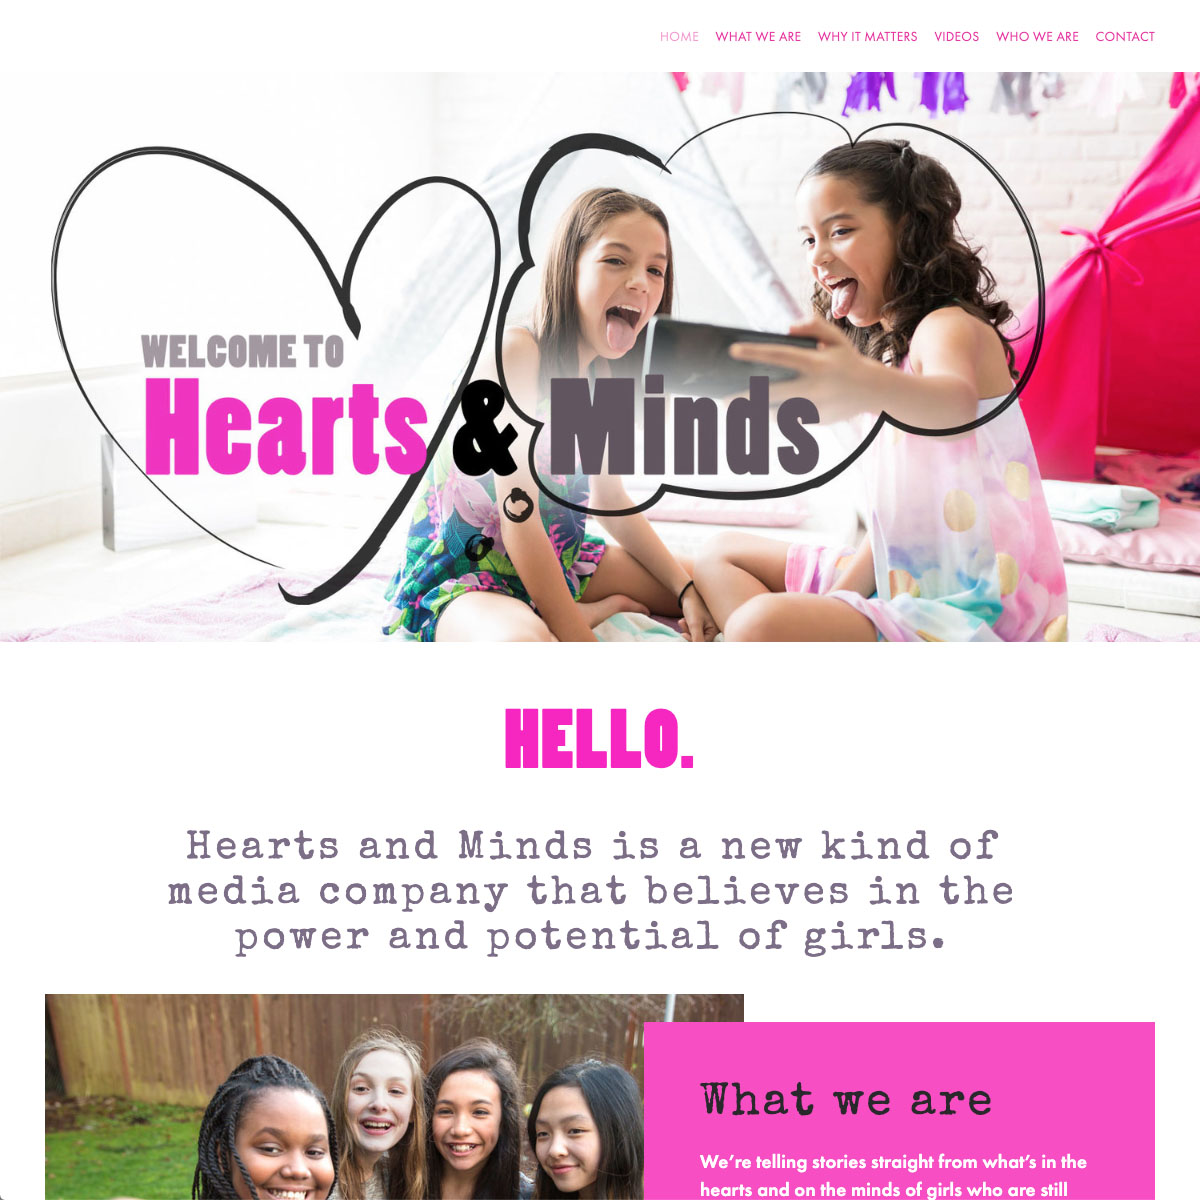 screenshot of the Hearts and Minds homepage showing a hero image of two girls sticking their tongues out while taking a selfie